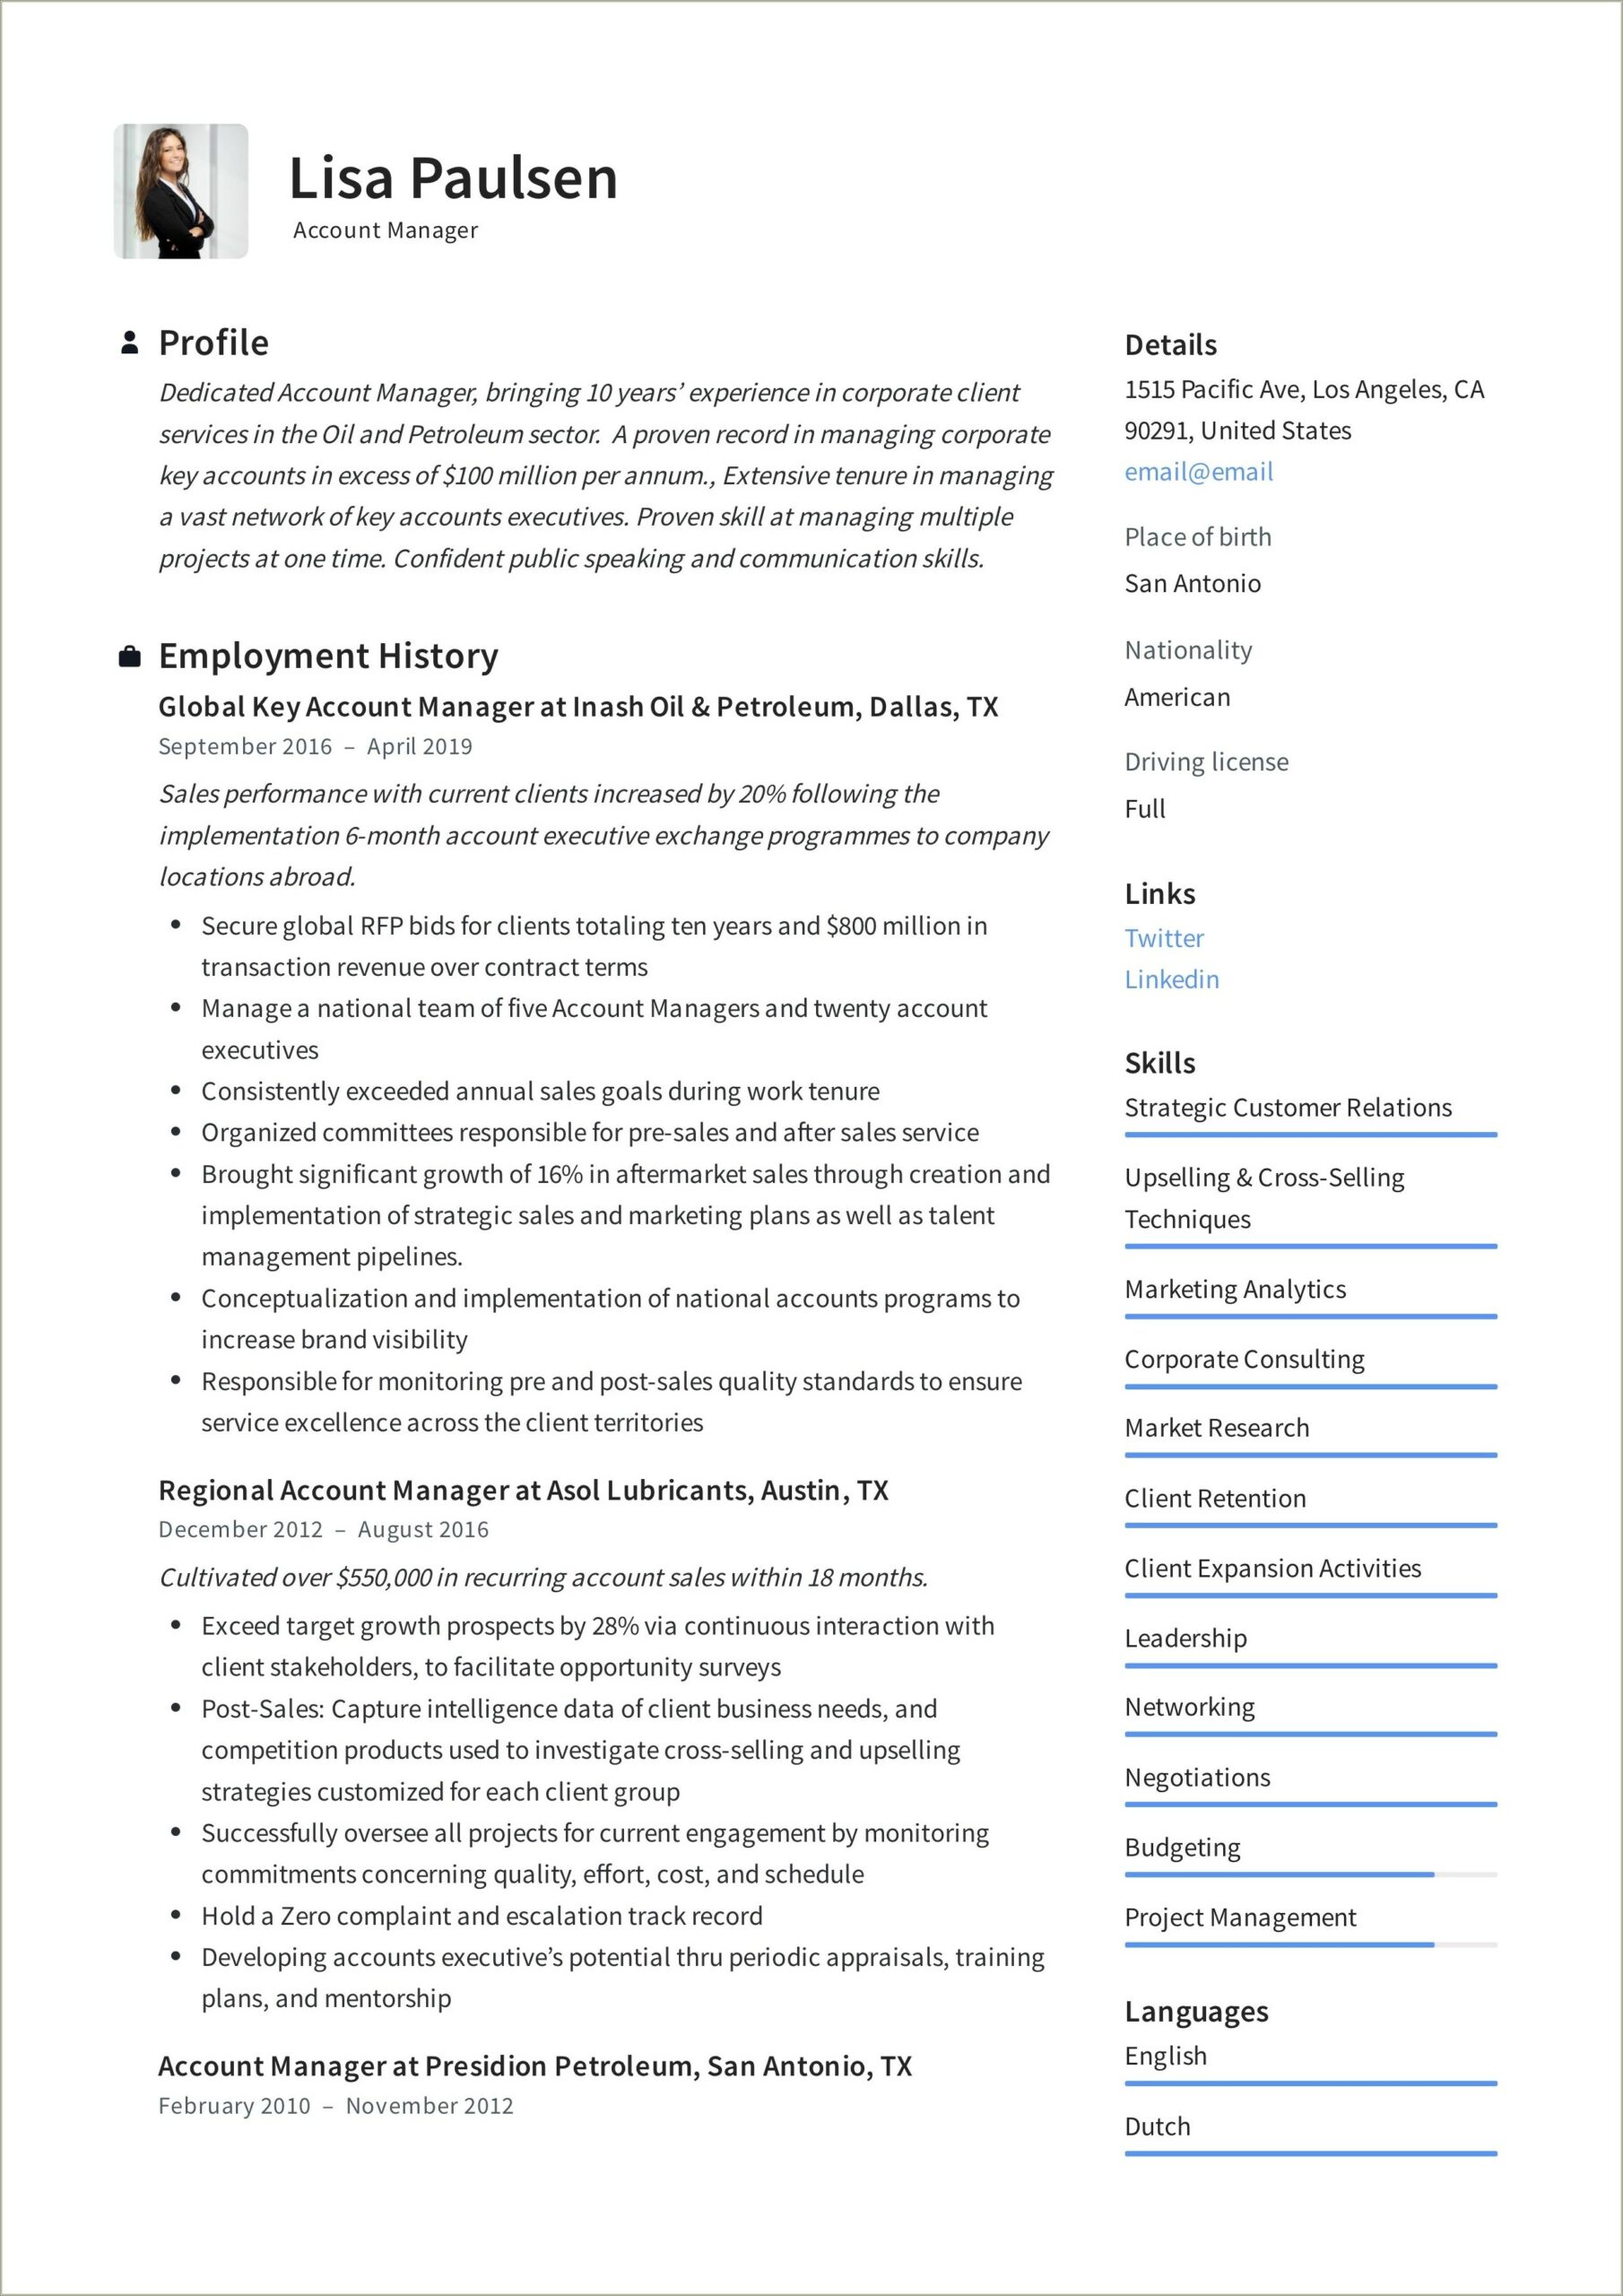 Resume Samples For New Account Manager Position